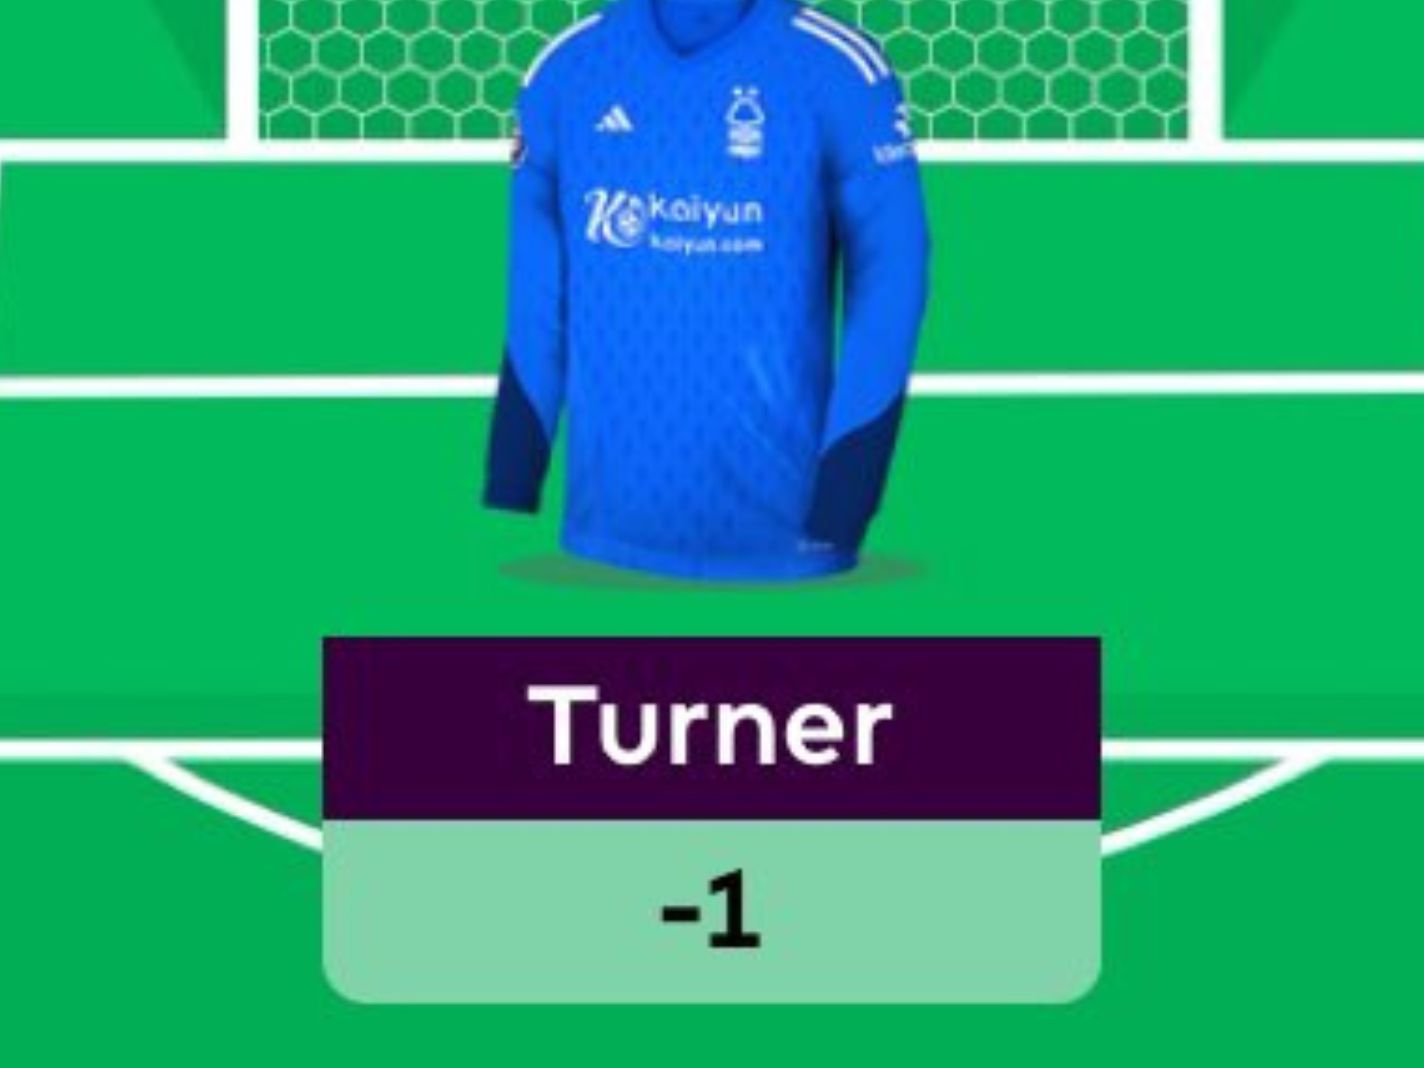 How Did Matt Turner Receive -1 Point in FPL Without Even Playing?